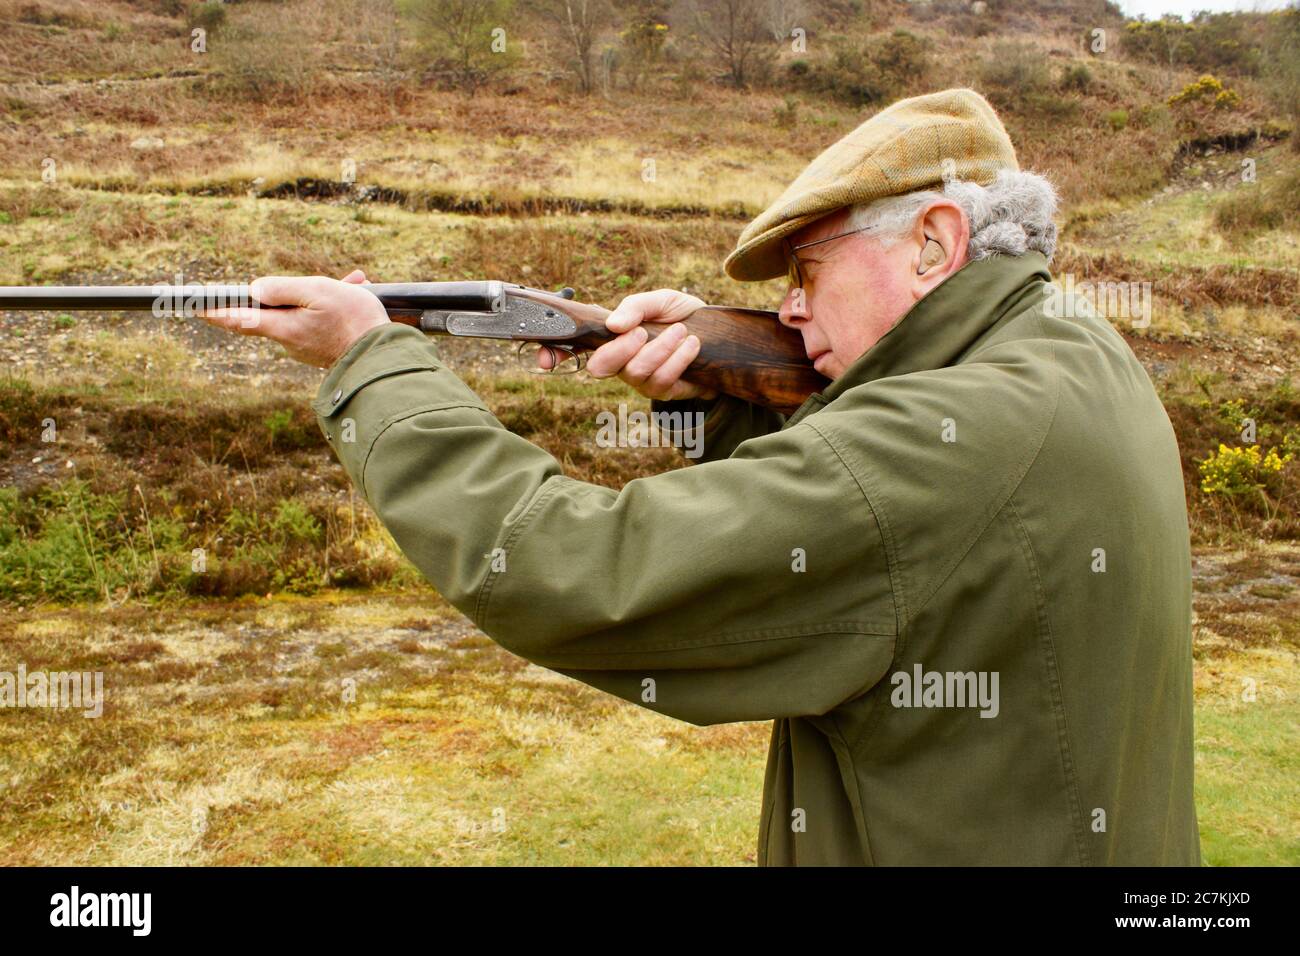 Gun-fitting, English Side By Side, Shotgun, 1904 Shotgun, Side Lock Ejector, Traditional, Field Sport, Countryside, Country Pursuit. Stock Photo